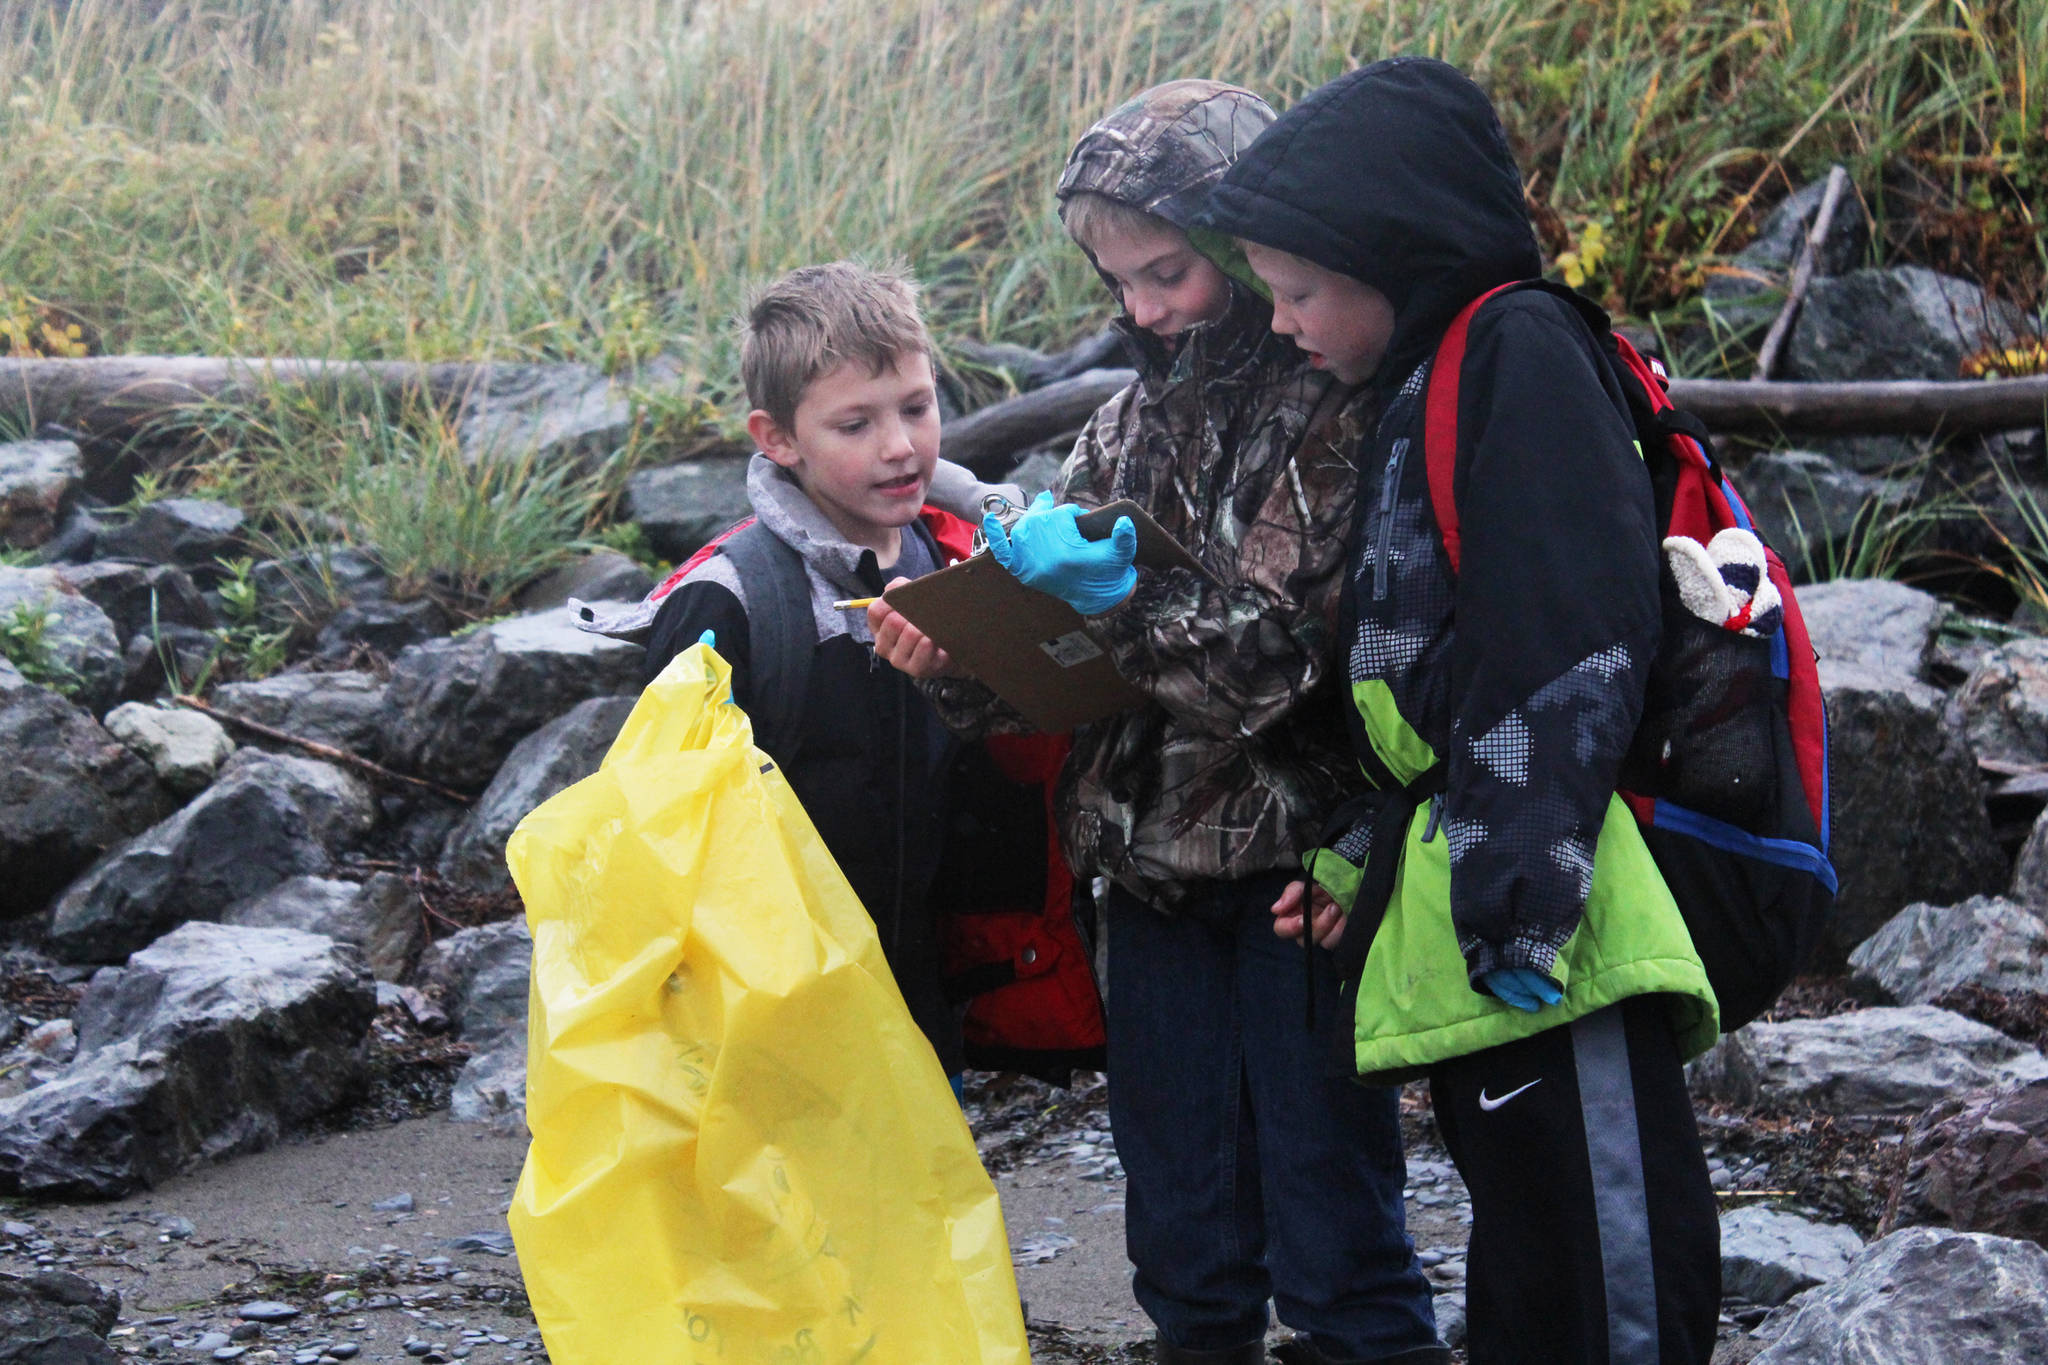 Niko Erickson (left), Tanner Johnson (center) and Zephaniah Weisser (right) look at the progress they’ve made in recording their findings on the shoreline of Kachemak Bay on Friday, Sept. 22, 2017 near Mariner Park in Homer, Alaska. Several classes from McNeil Canyon Elementary School participated in this year’s Kachemak Bay CoastWalk, in which students and citizen groups can adopt a section of coast to clean up. (Photo by Megan Pacer/Homer News)